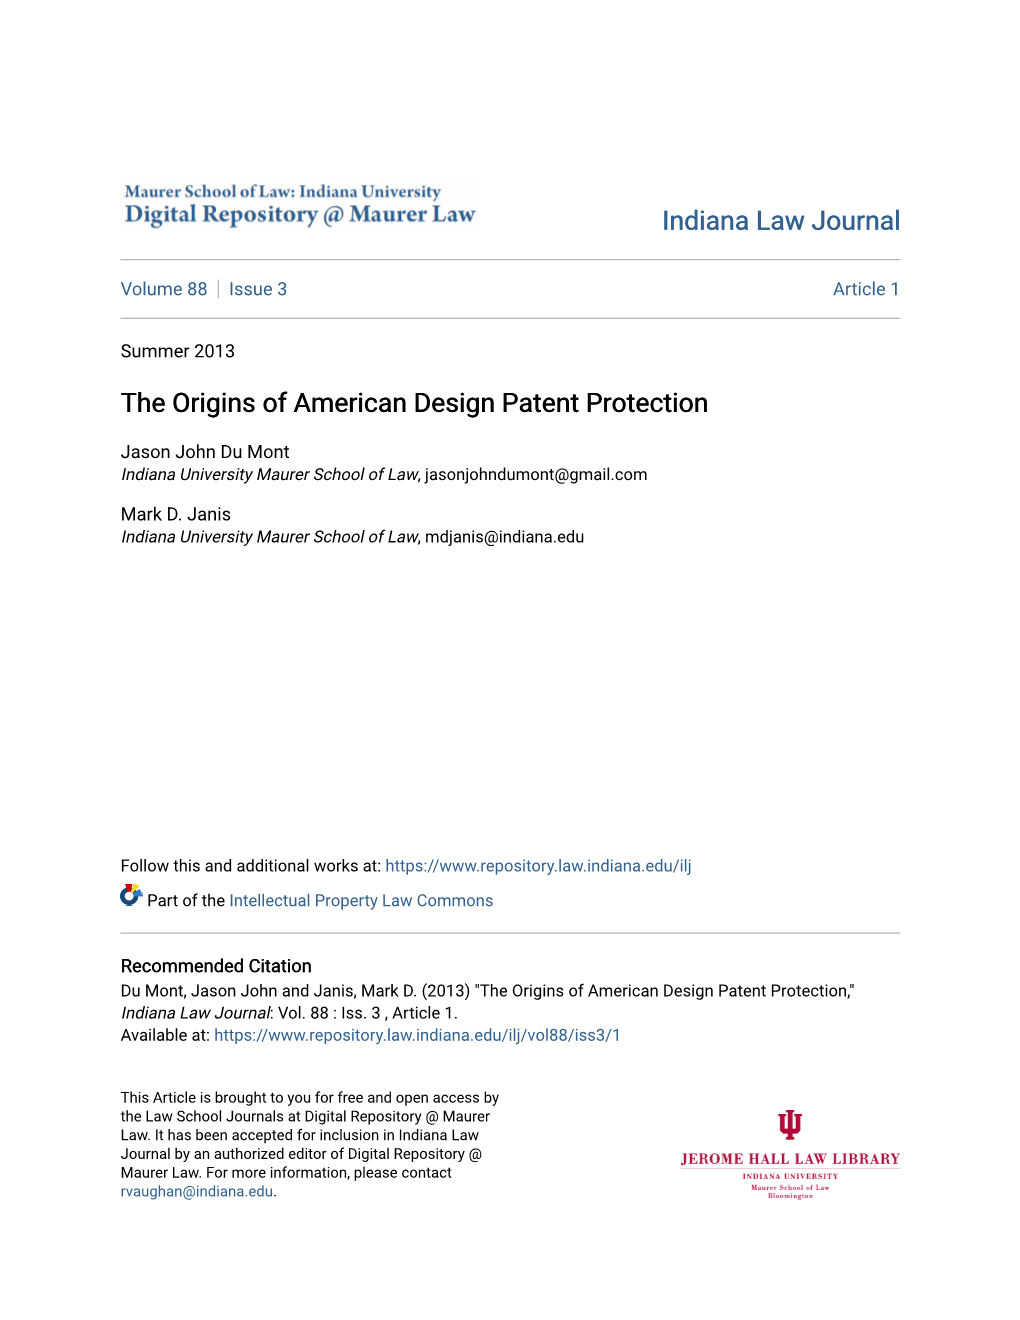 The Origins of American Design Patent Protection